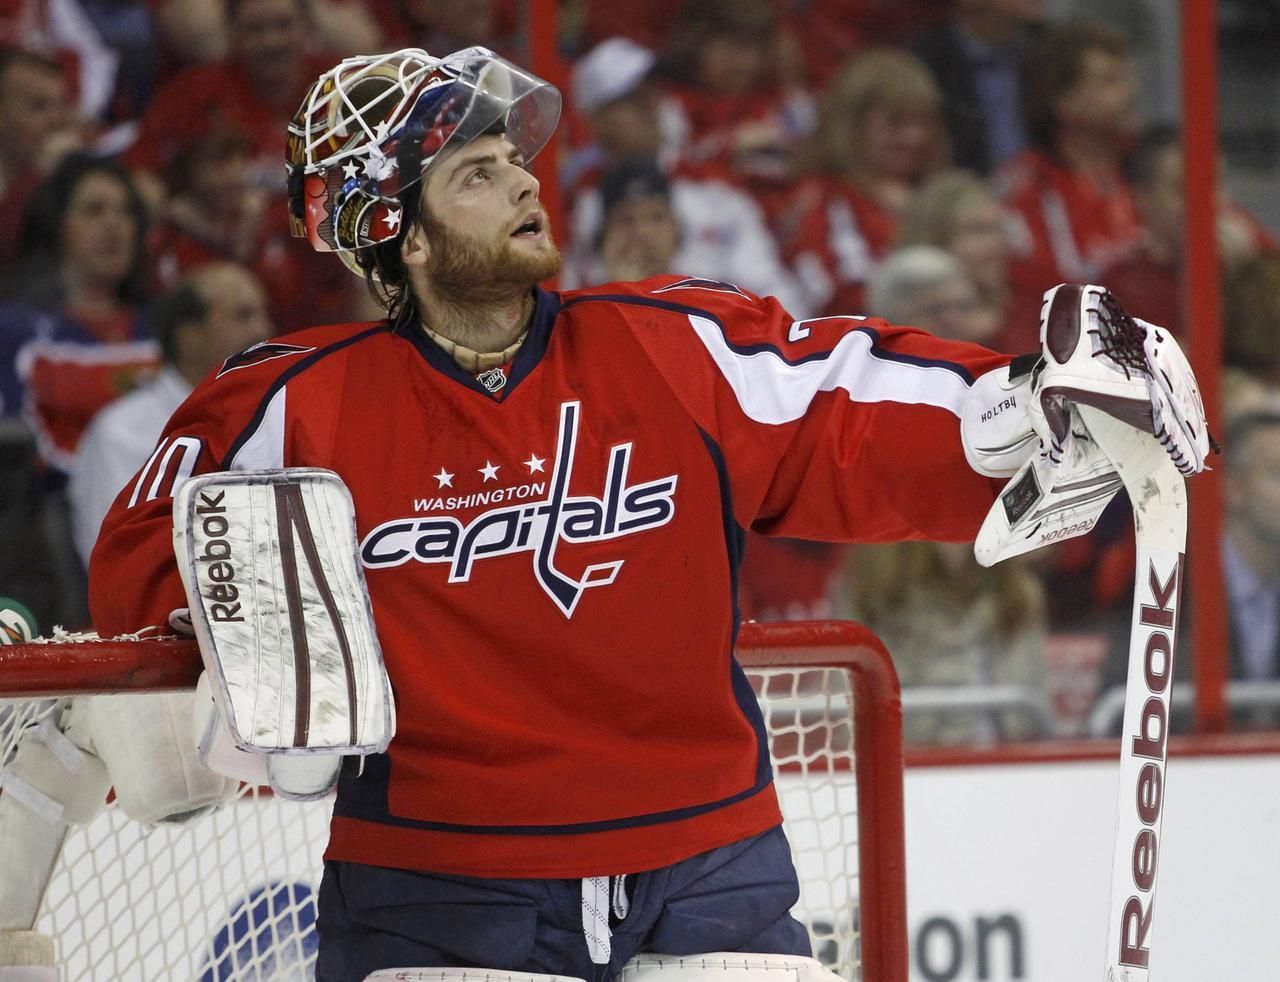 Stanley Cup: Washington - NY Rangers (Braden Holtby)